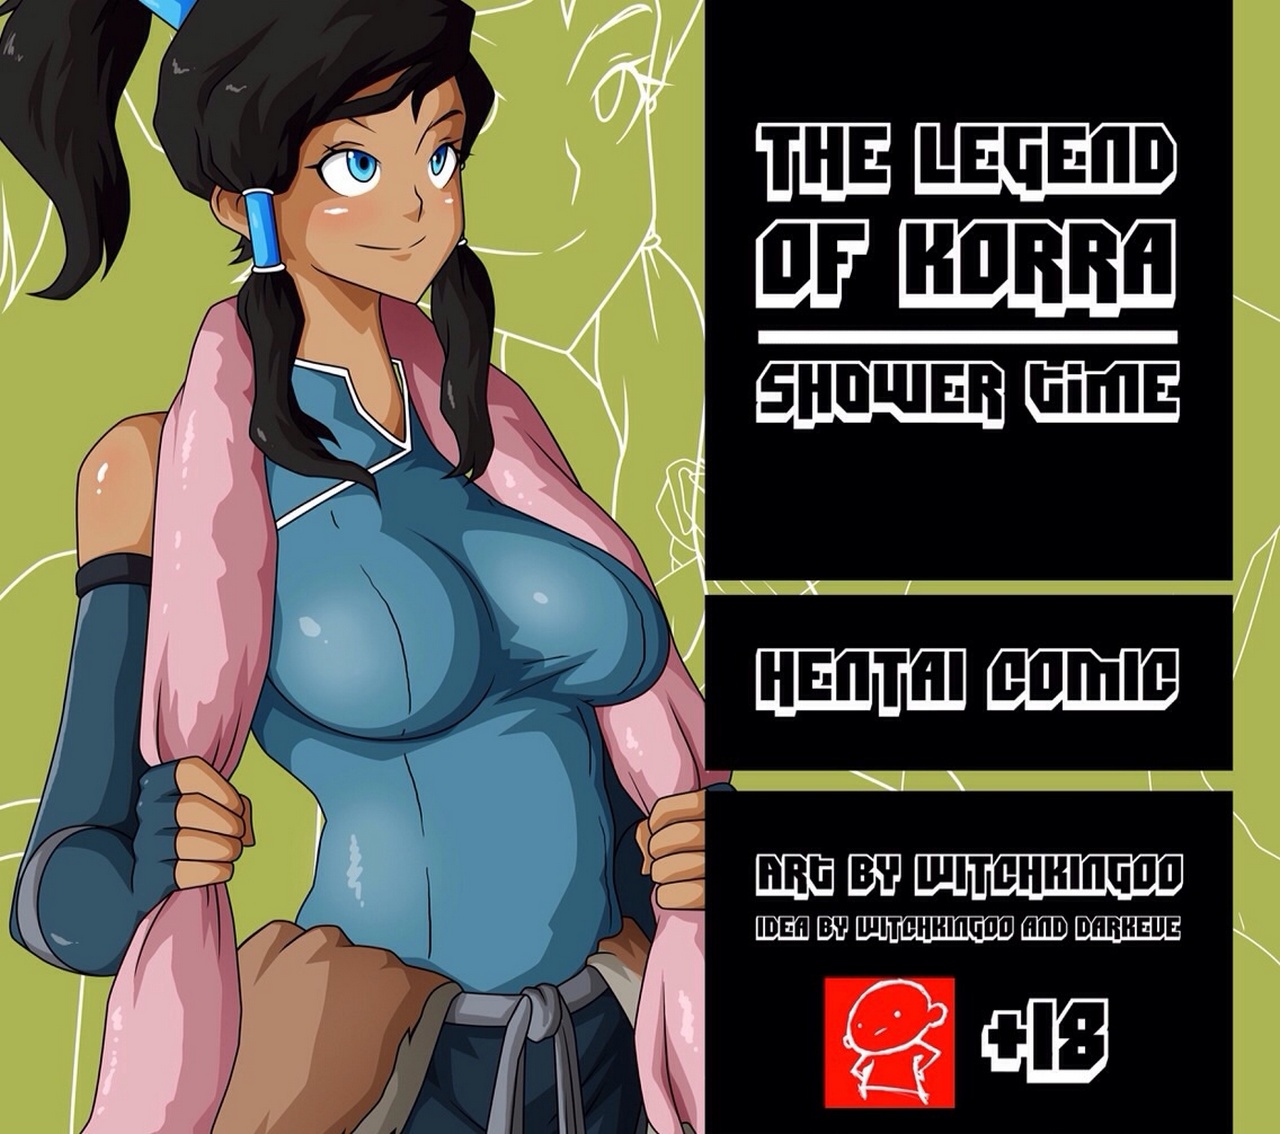 witchking00] - The Legend Of Korra - Shower Time (the legend of korra) porn  comic. Yuri porn comics.